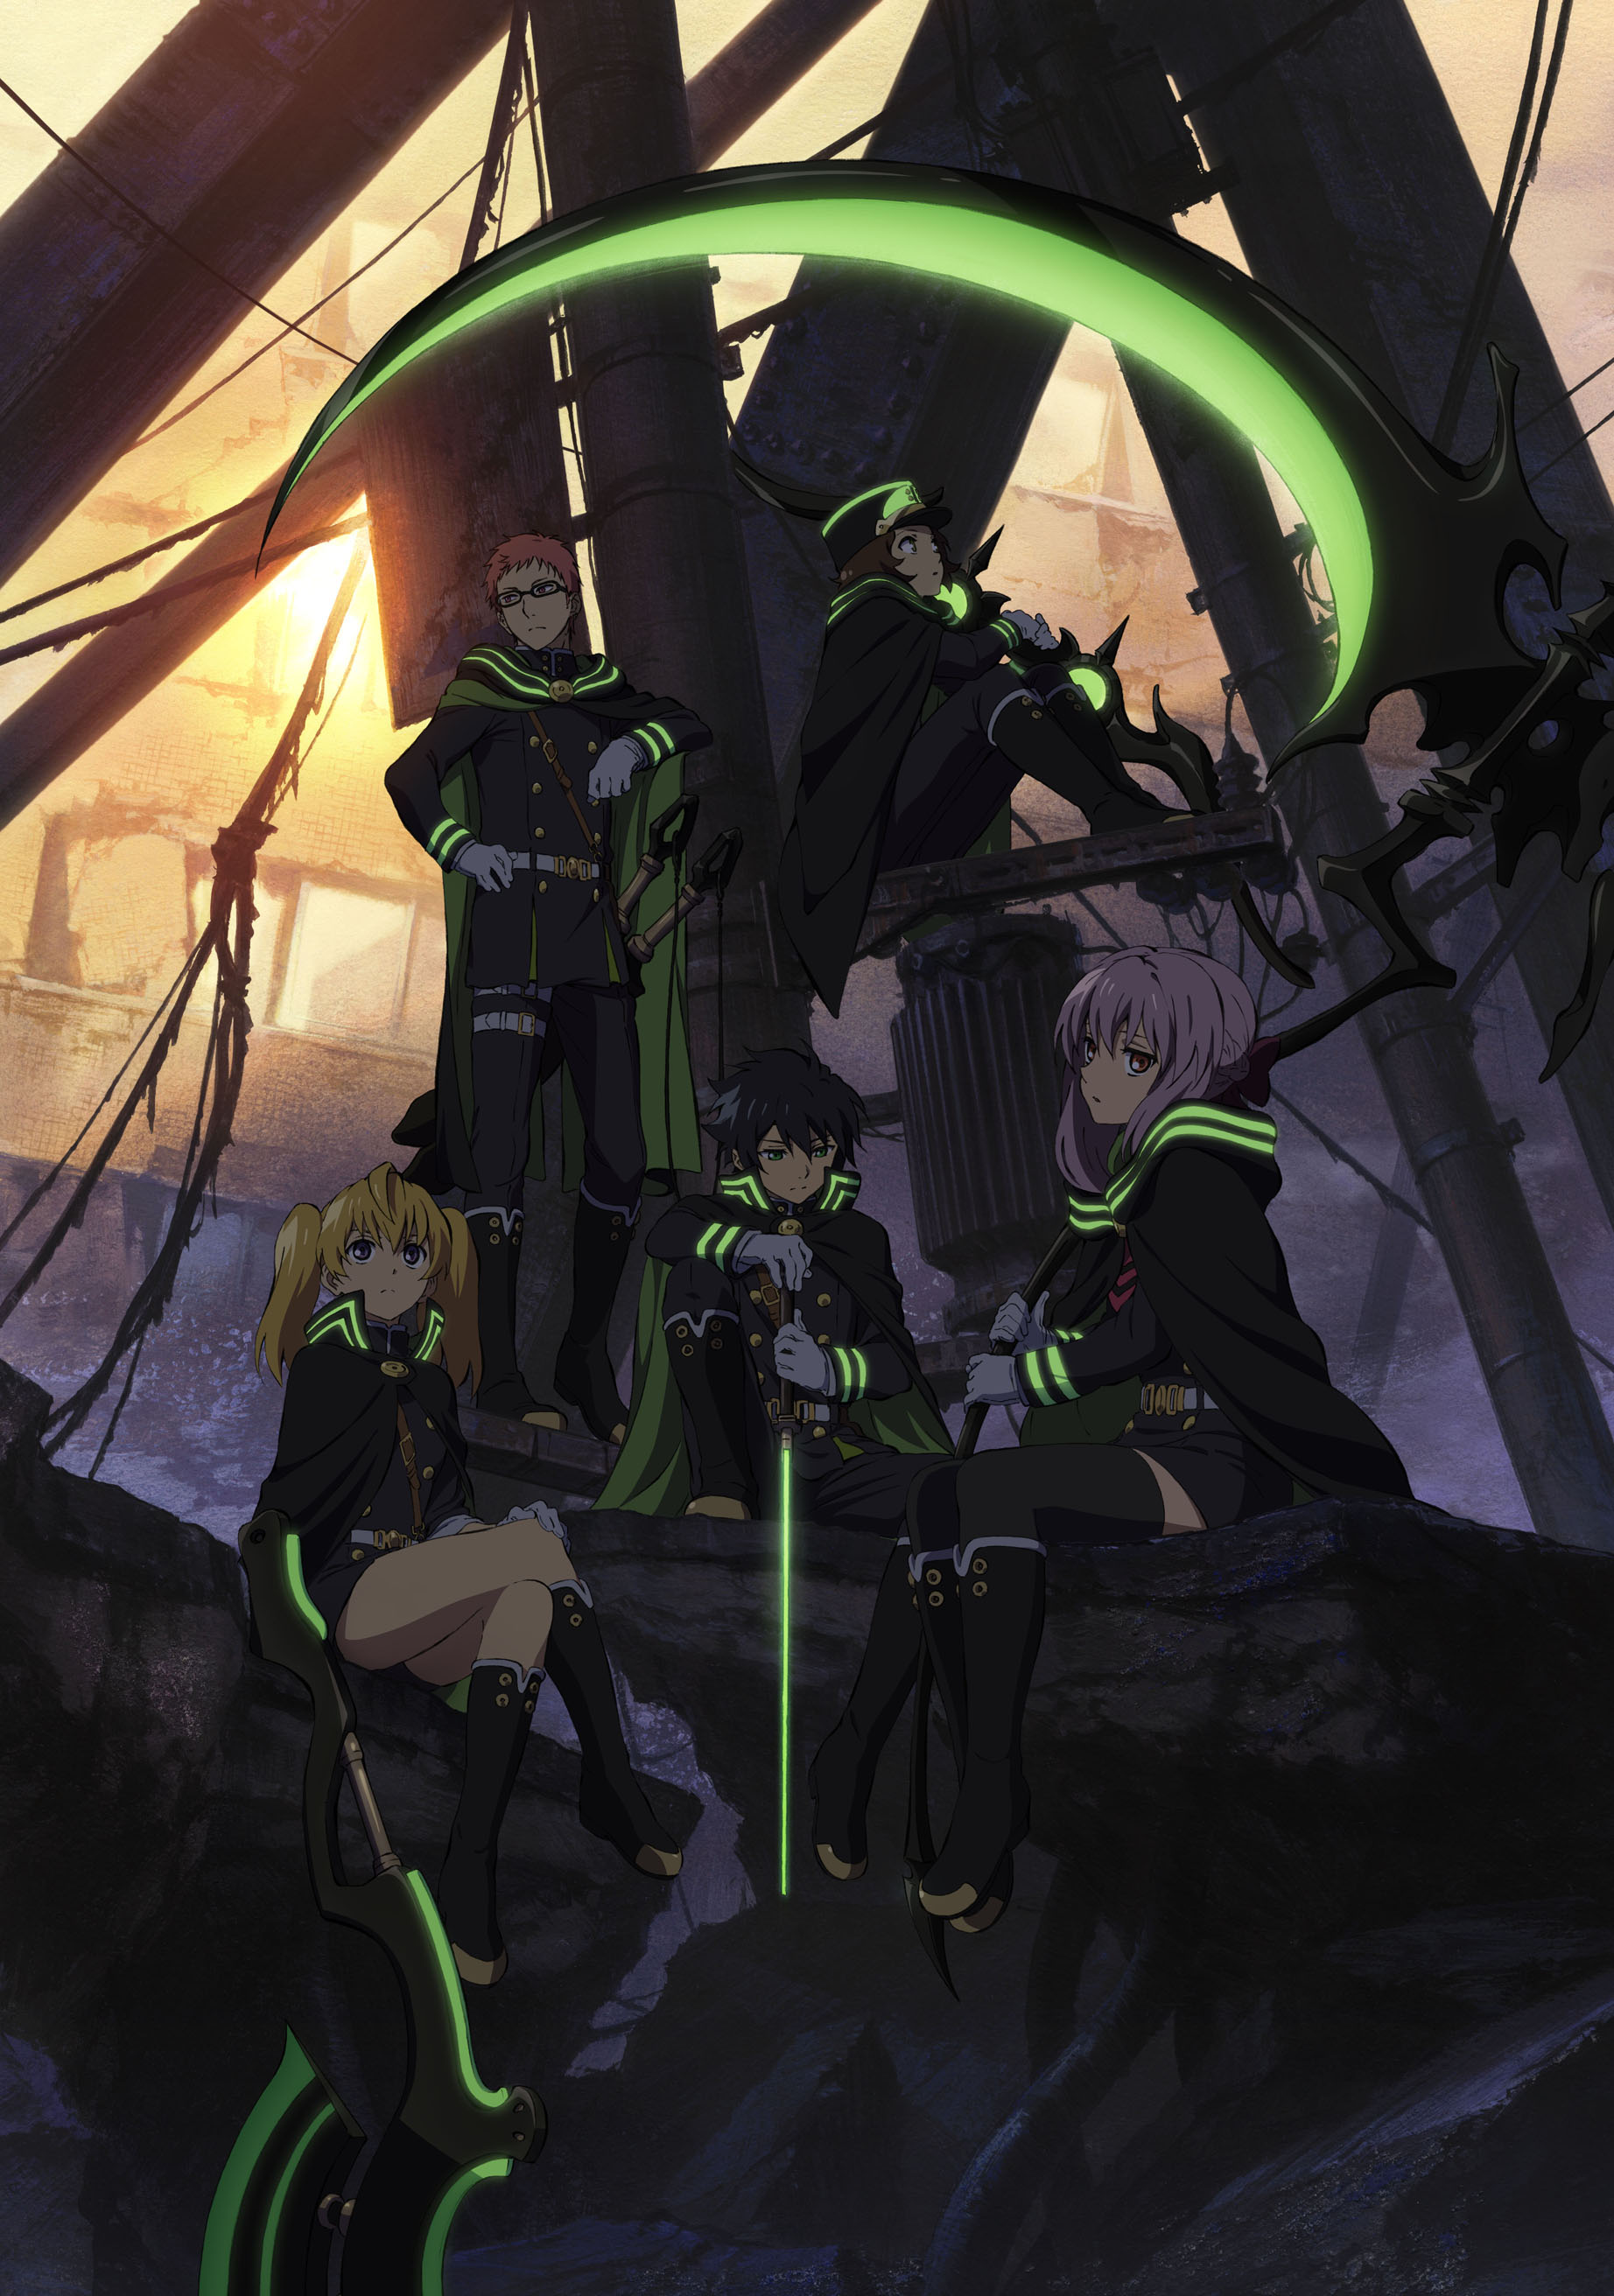 Seraph of the End Art